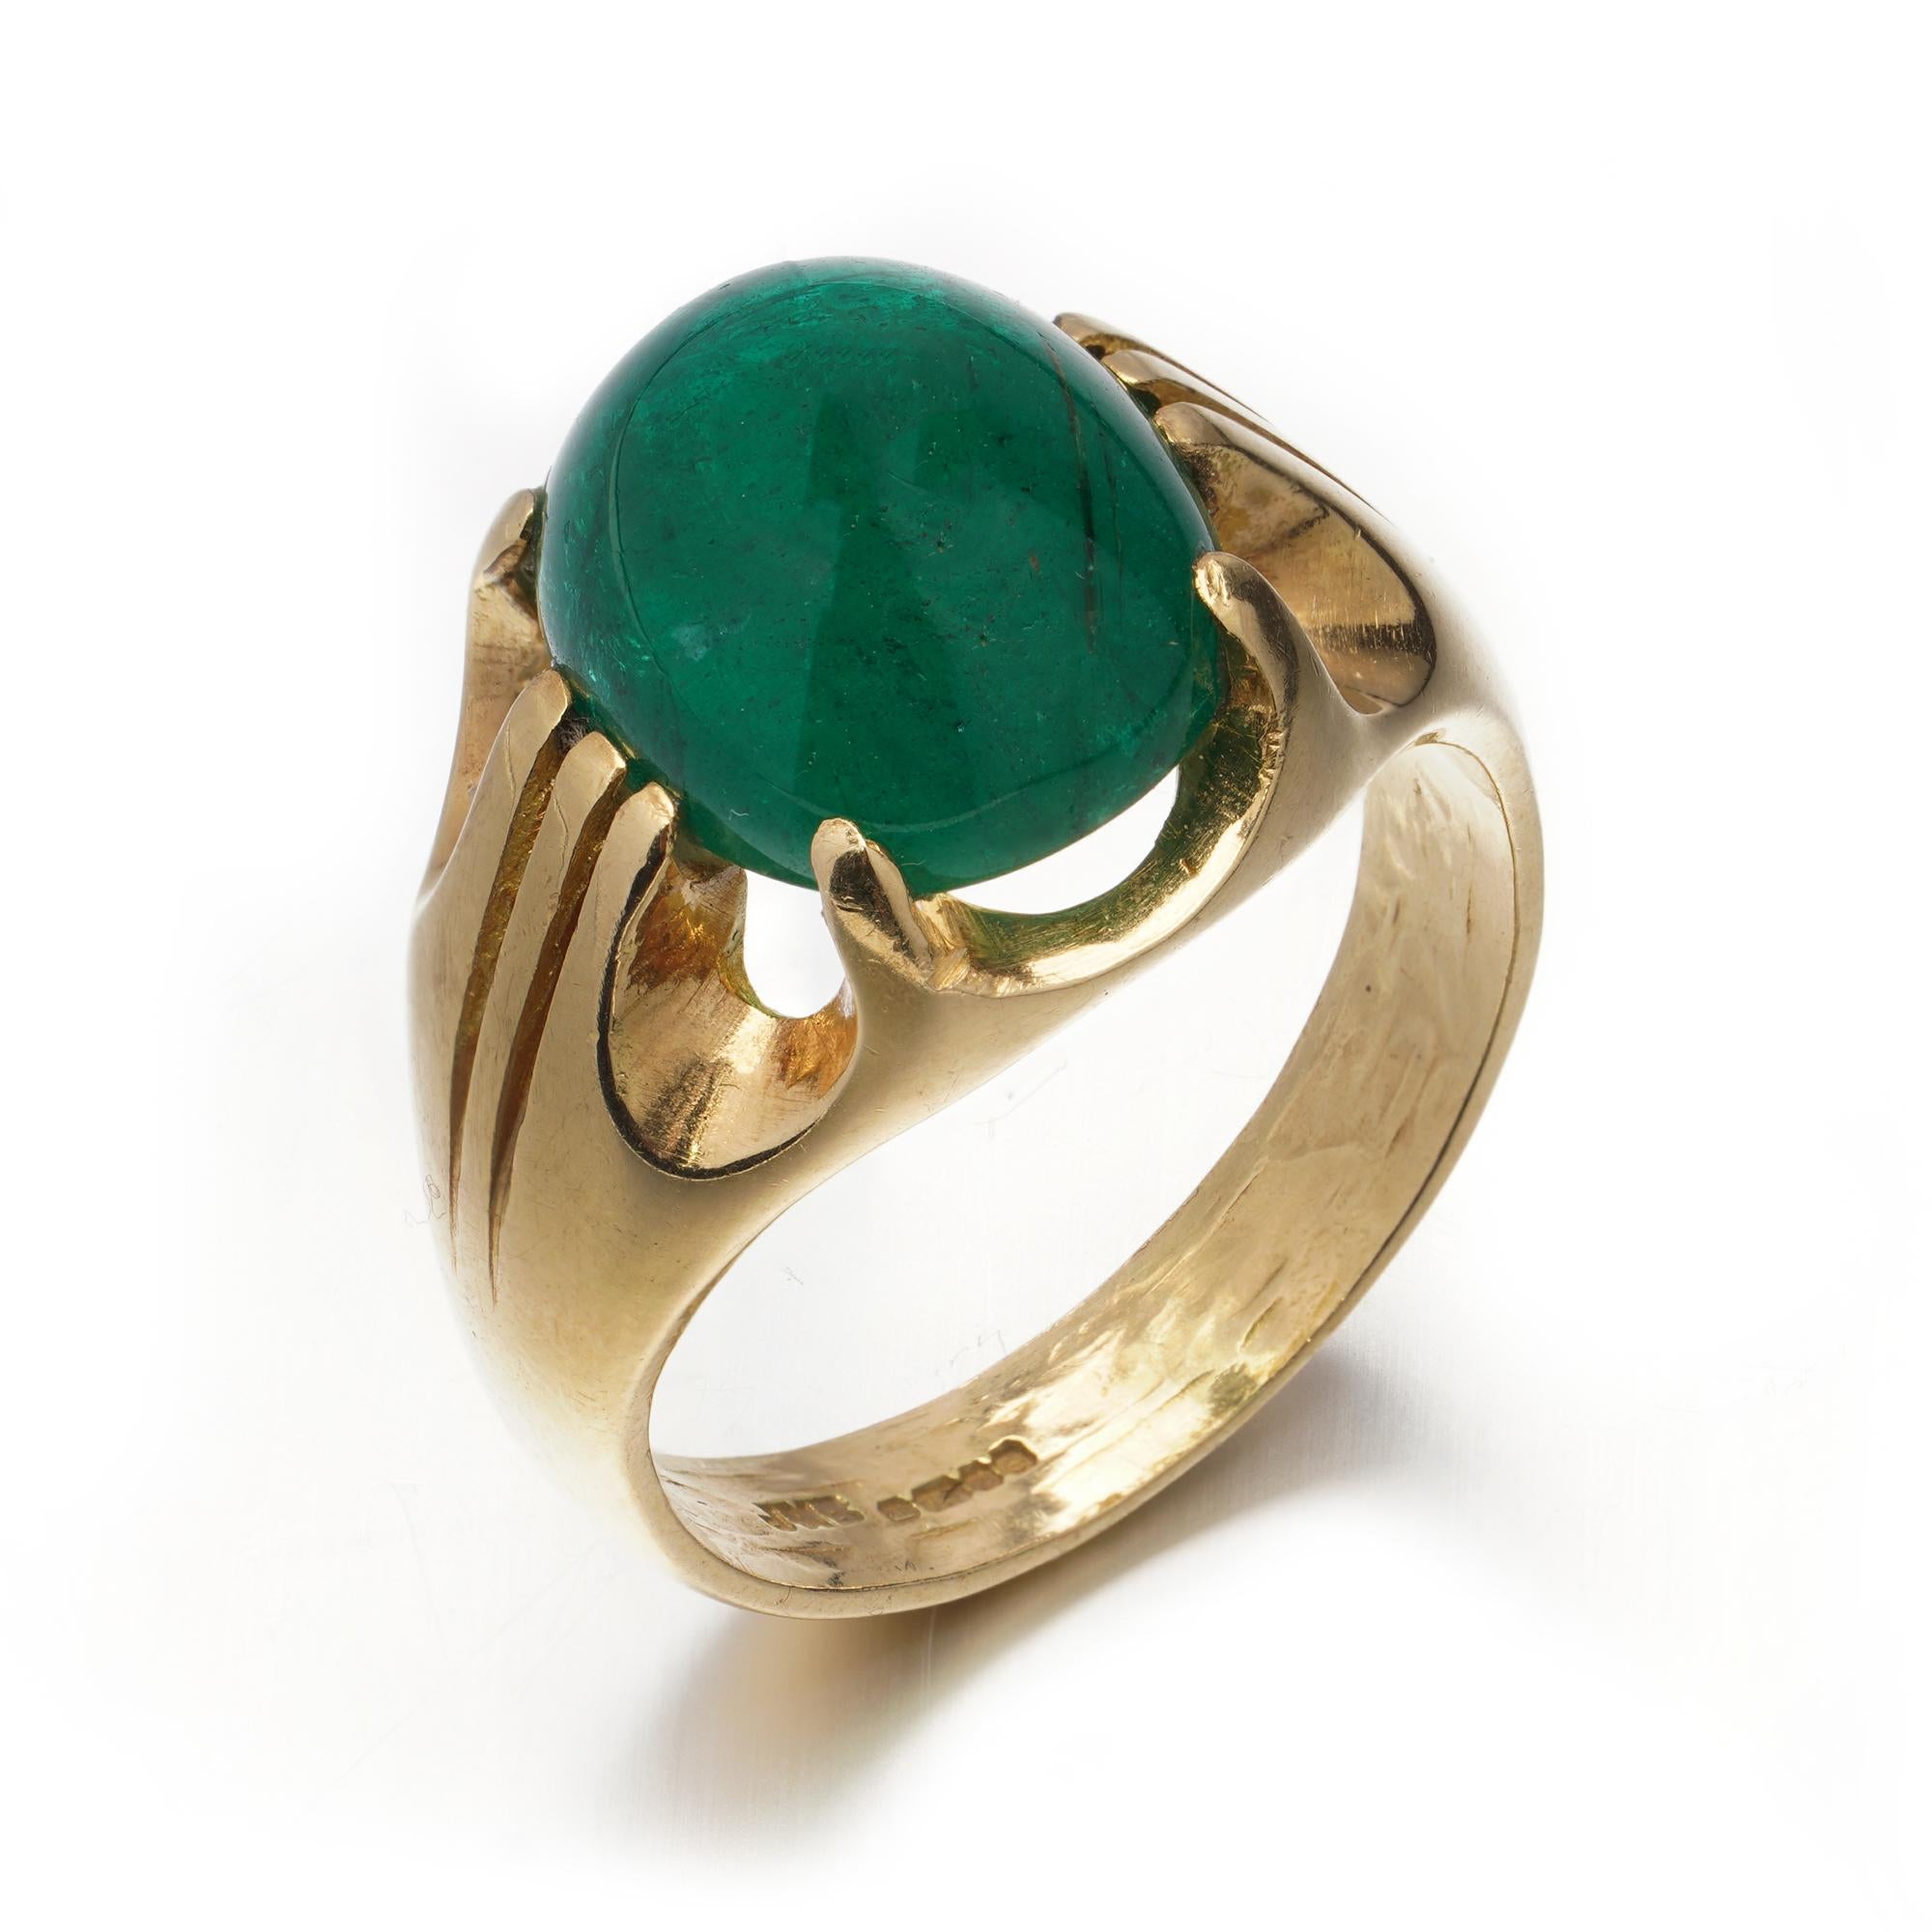 18kt. yellow gold dome 7.50 ct. cabochon emerald ring. 
Made in England, Birmingham, 2004
Hallmarked for 750 yellow gold and maker's mark JMB. 

The dimensions - 
Ring Size: Length x Width x depth: 3.1 x 2.3 x 1.6 cm 
Finger Size (UK) = R (EU) = 58